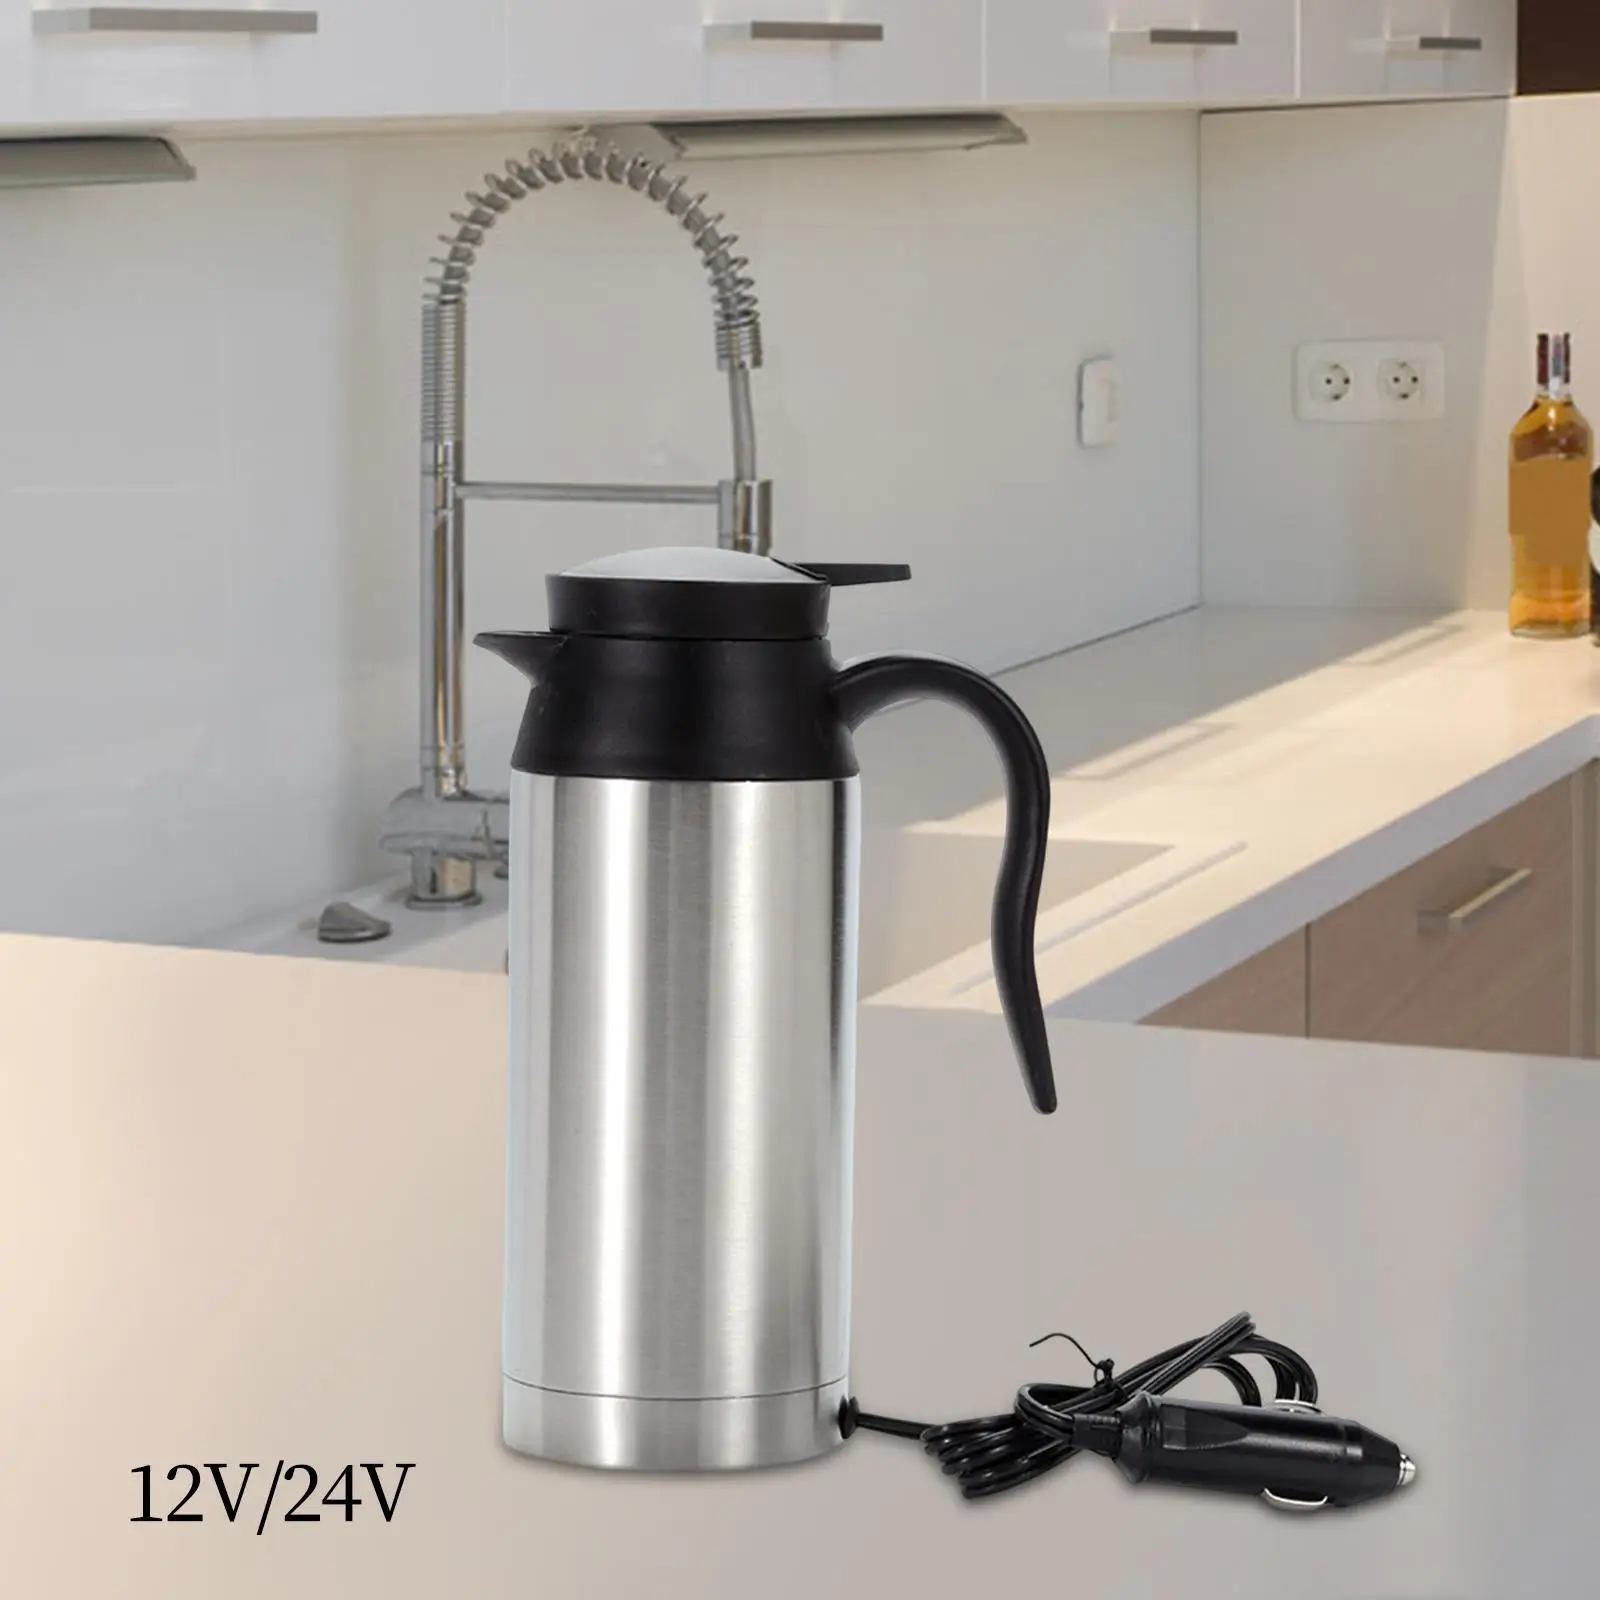 Portable 750ml Stainless Steel Electric Car Kettle Heating Cup Easily Clean ,Good Sealing Performance to Keep Water Warm